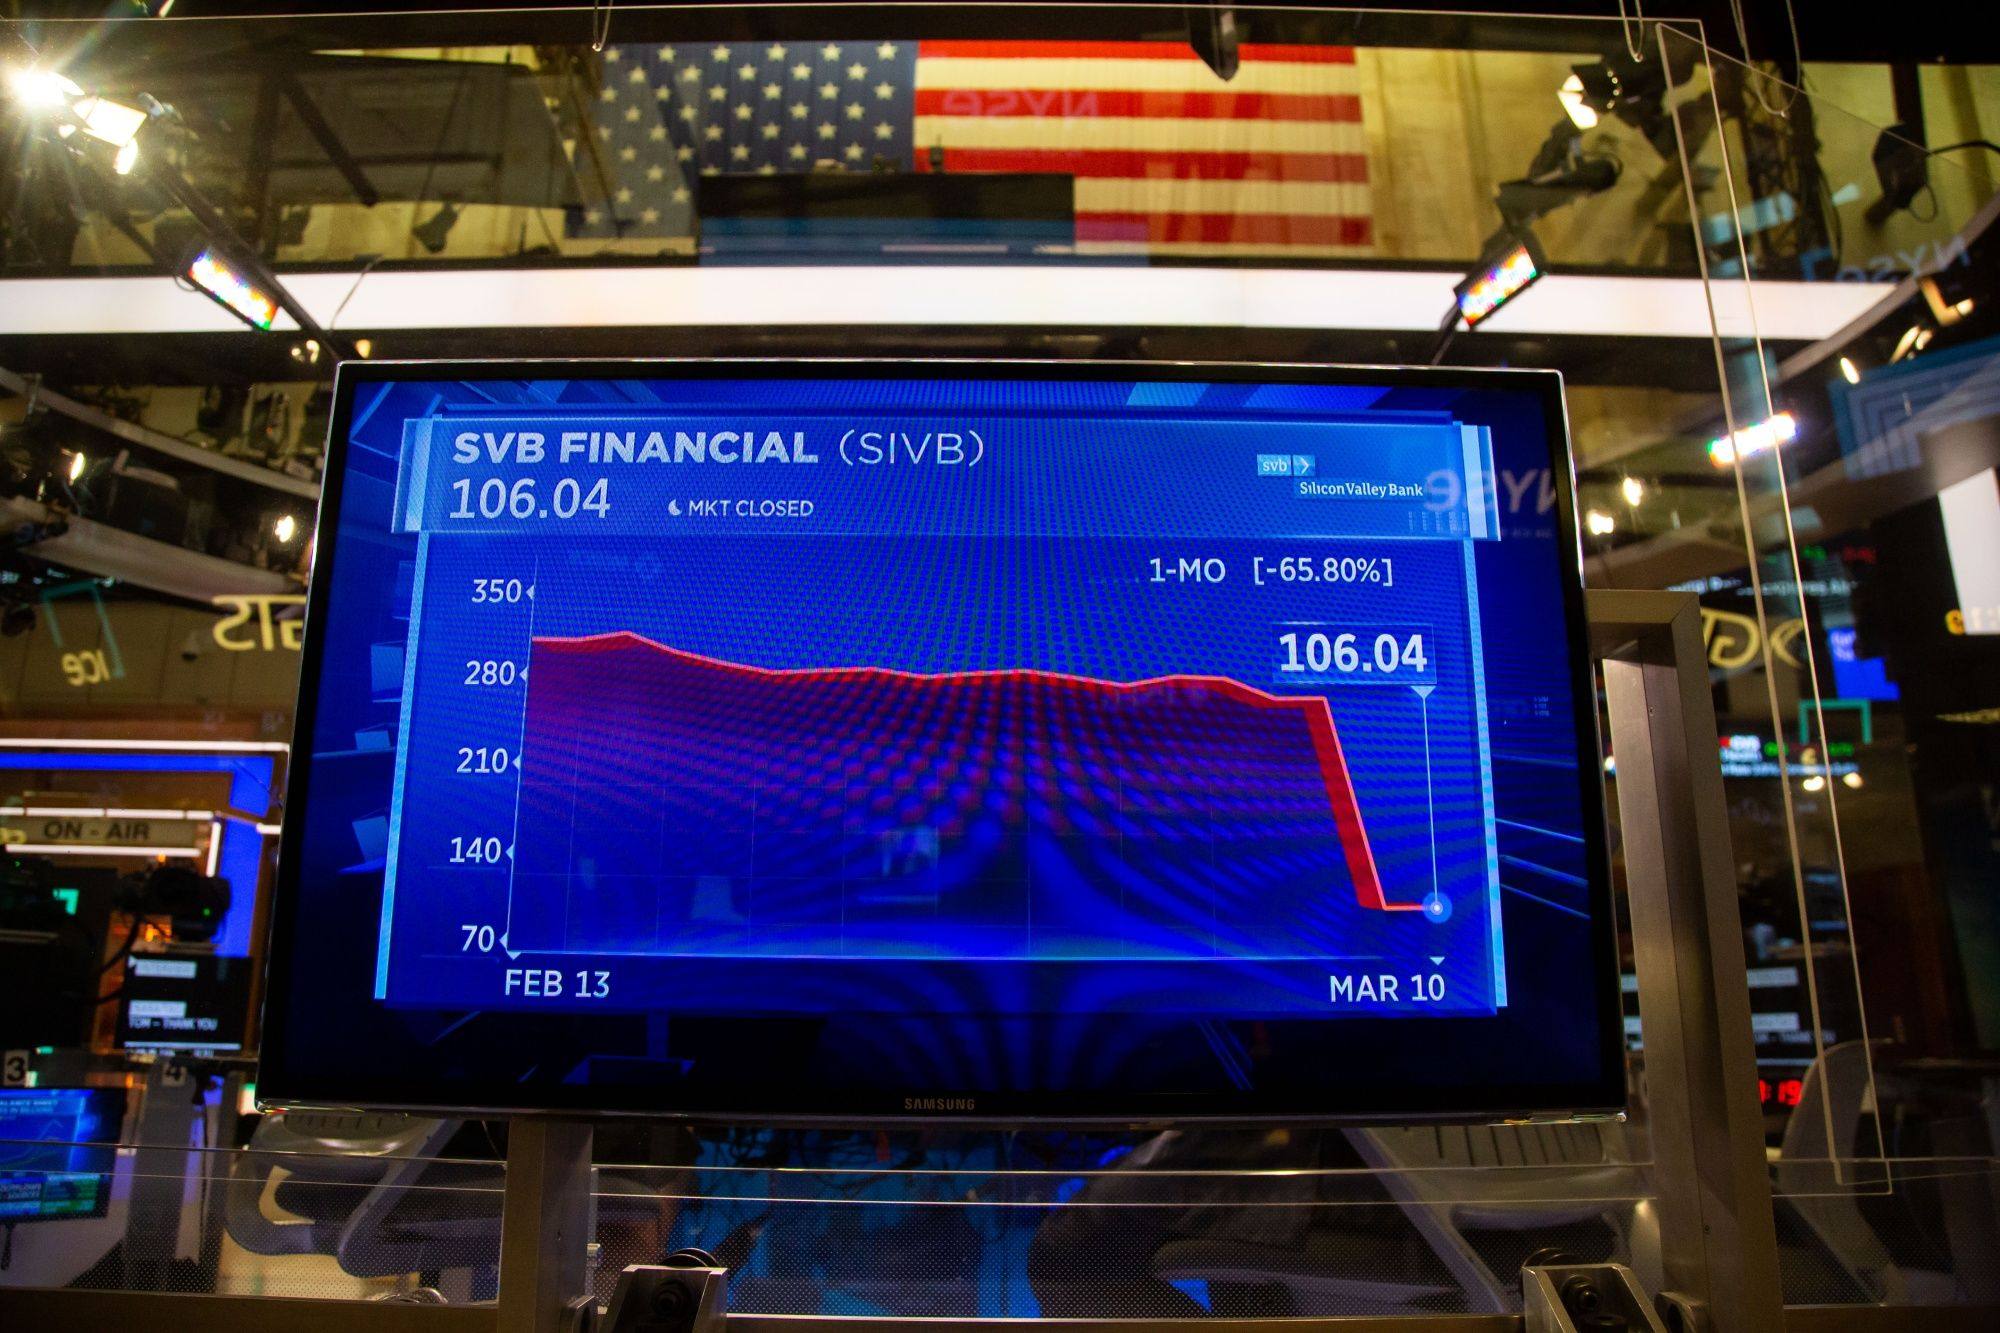 A chart at the New York Stock Exchange shows the plunge in SVB stocks as of March 10. Despite the shock, SVB’s collapse is unlikely to presage a repeat of the global financial crisis in 2008, as conditions today are different. Photo: Bloomberg